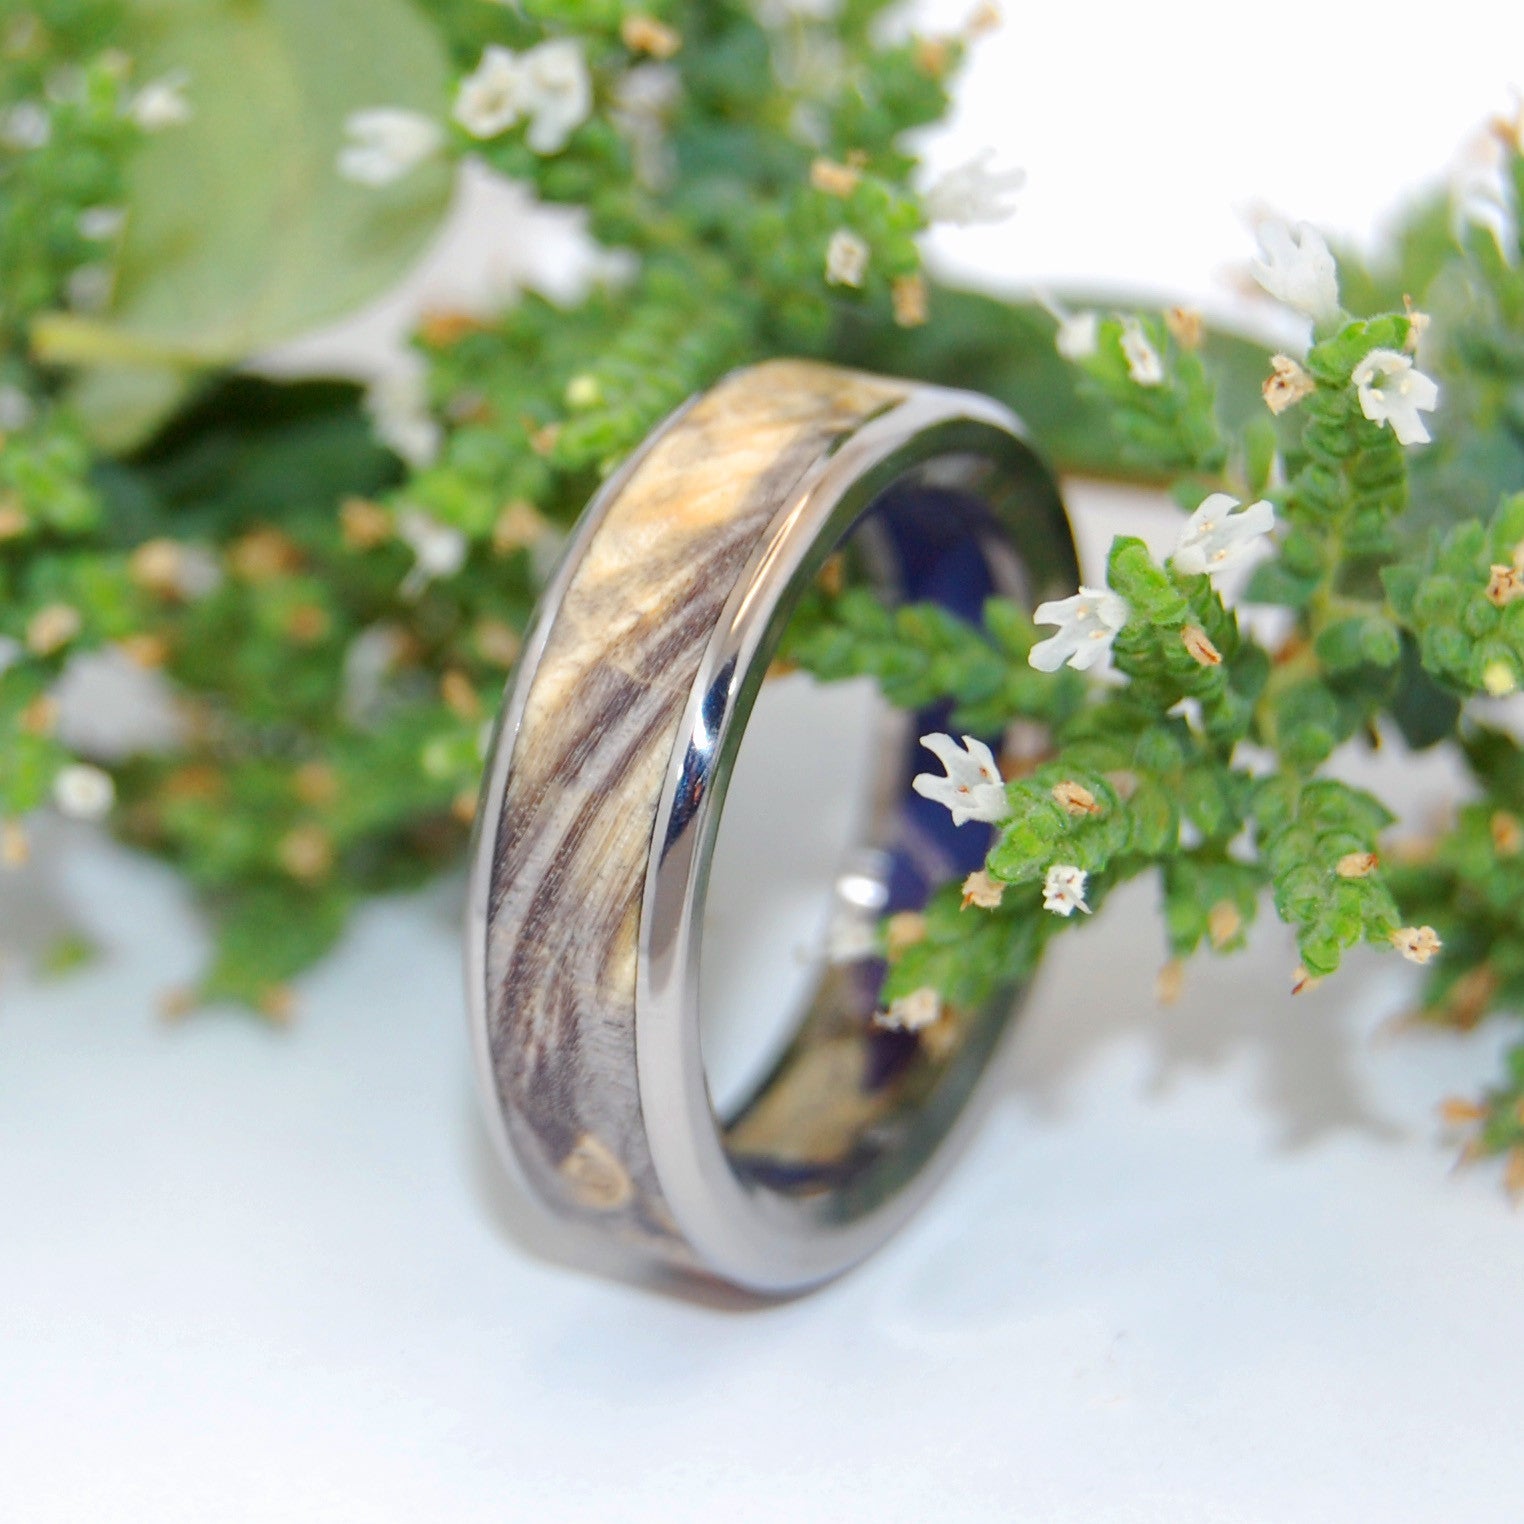 EYES IN YOUR DIRECTION | Buckeye Wood & Box Elder Wood - Unique Wooden Wedding Rings - Minter and Richter Designs